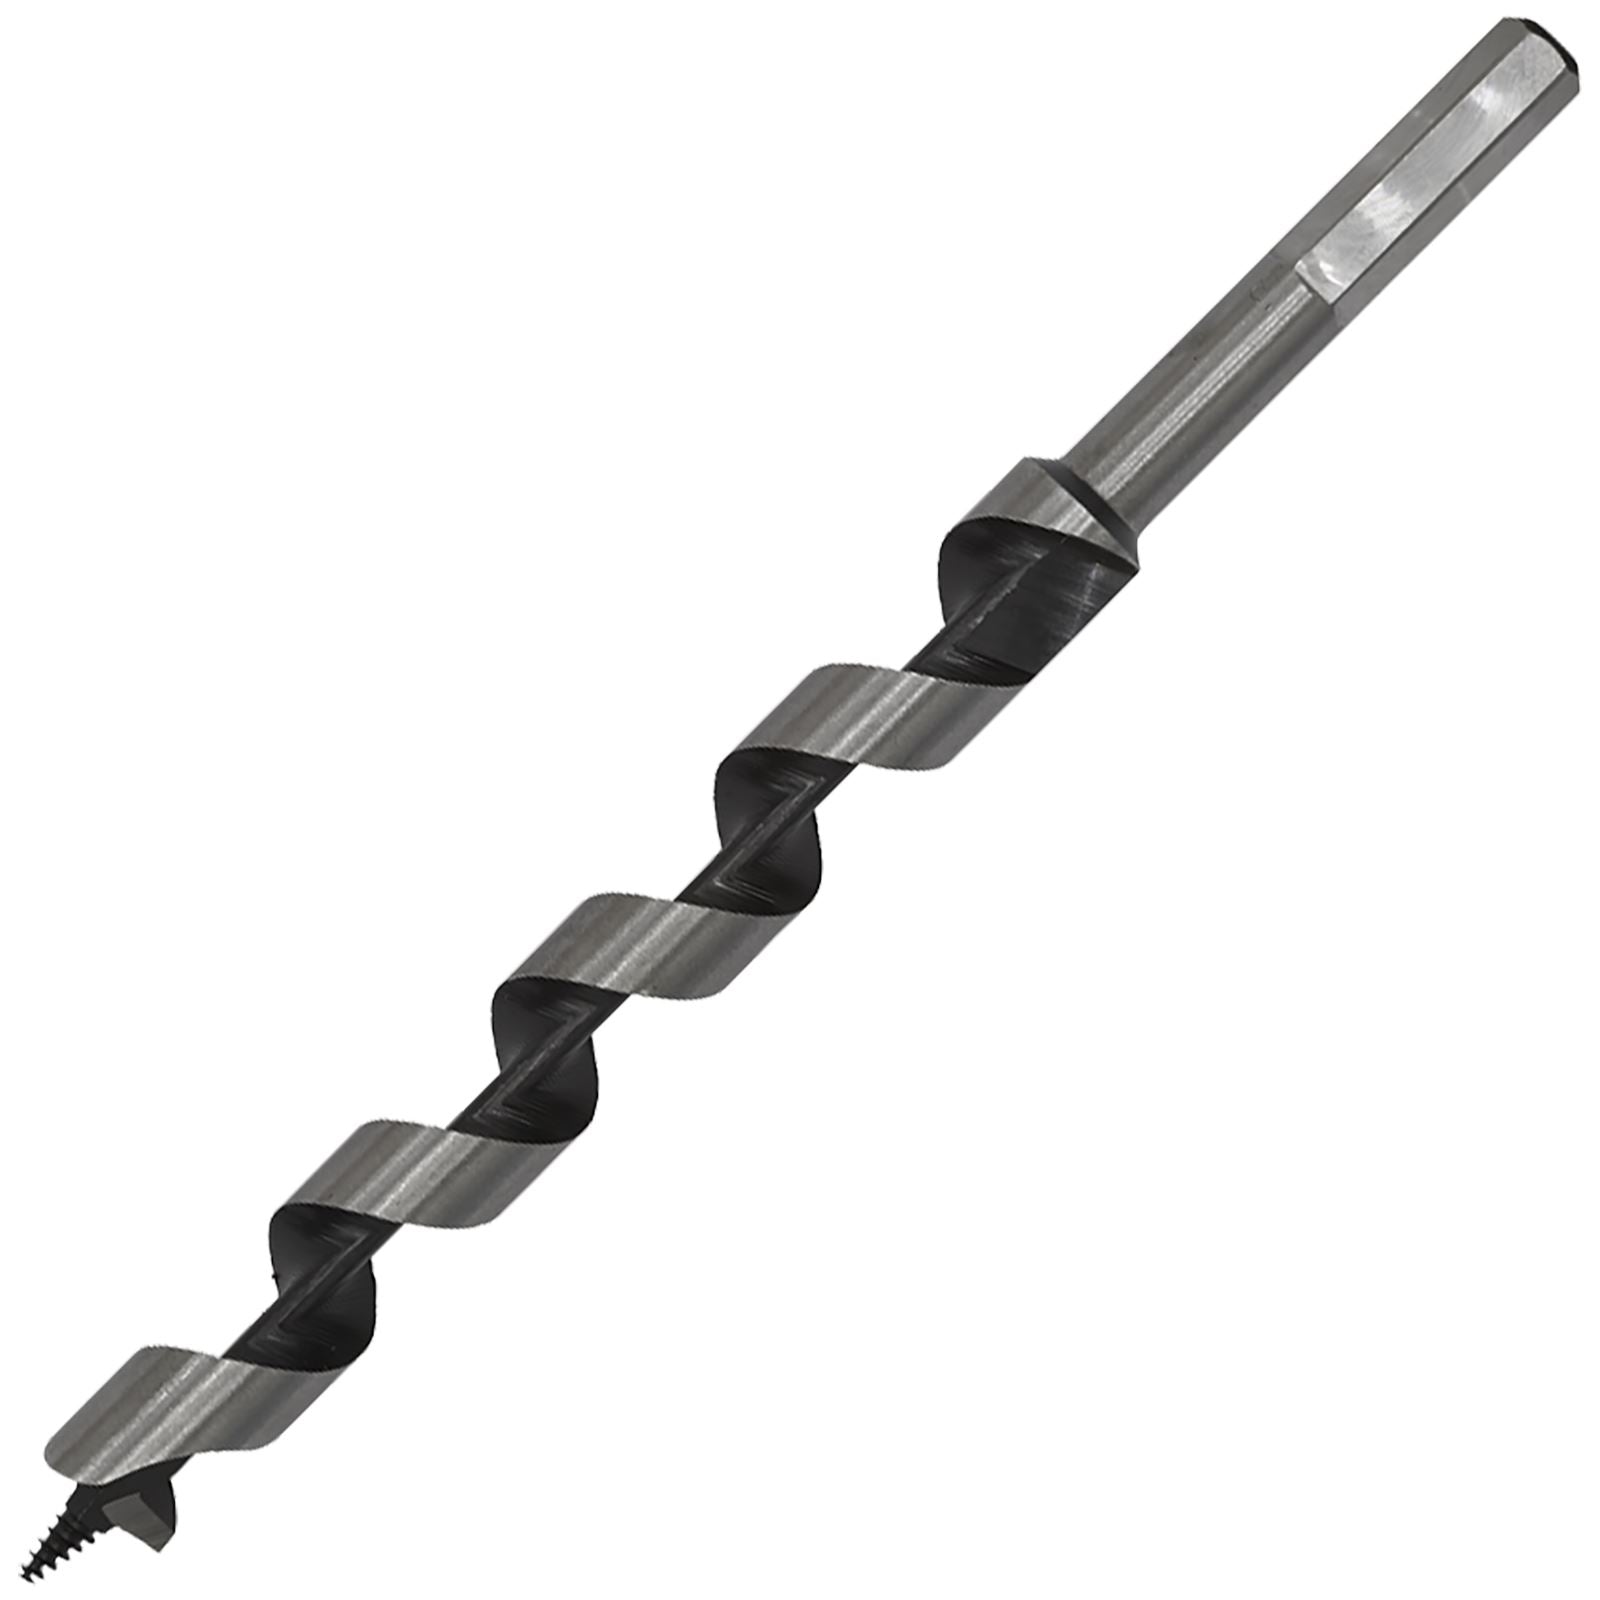 Worksafe by Sealey Auger Wood Drill Bit 18mm x 235mm